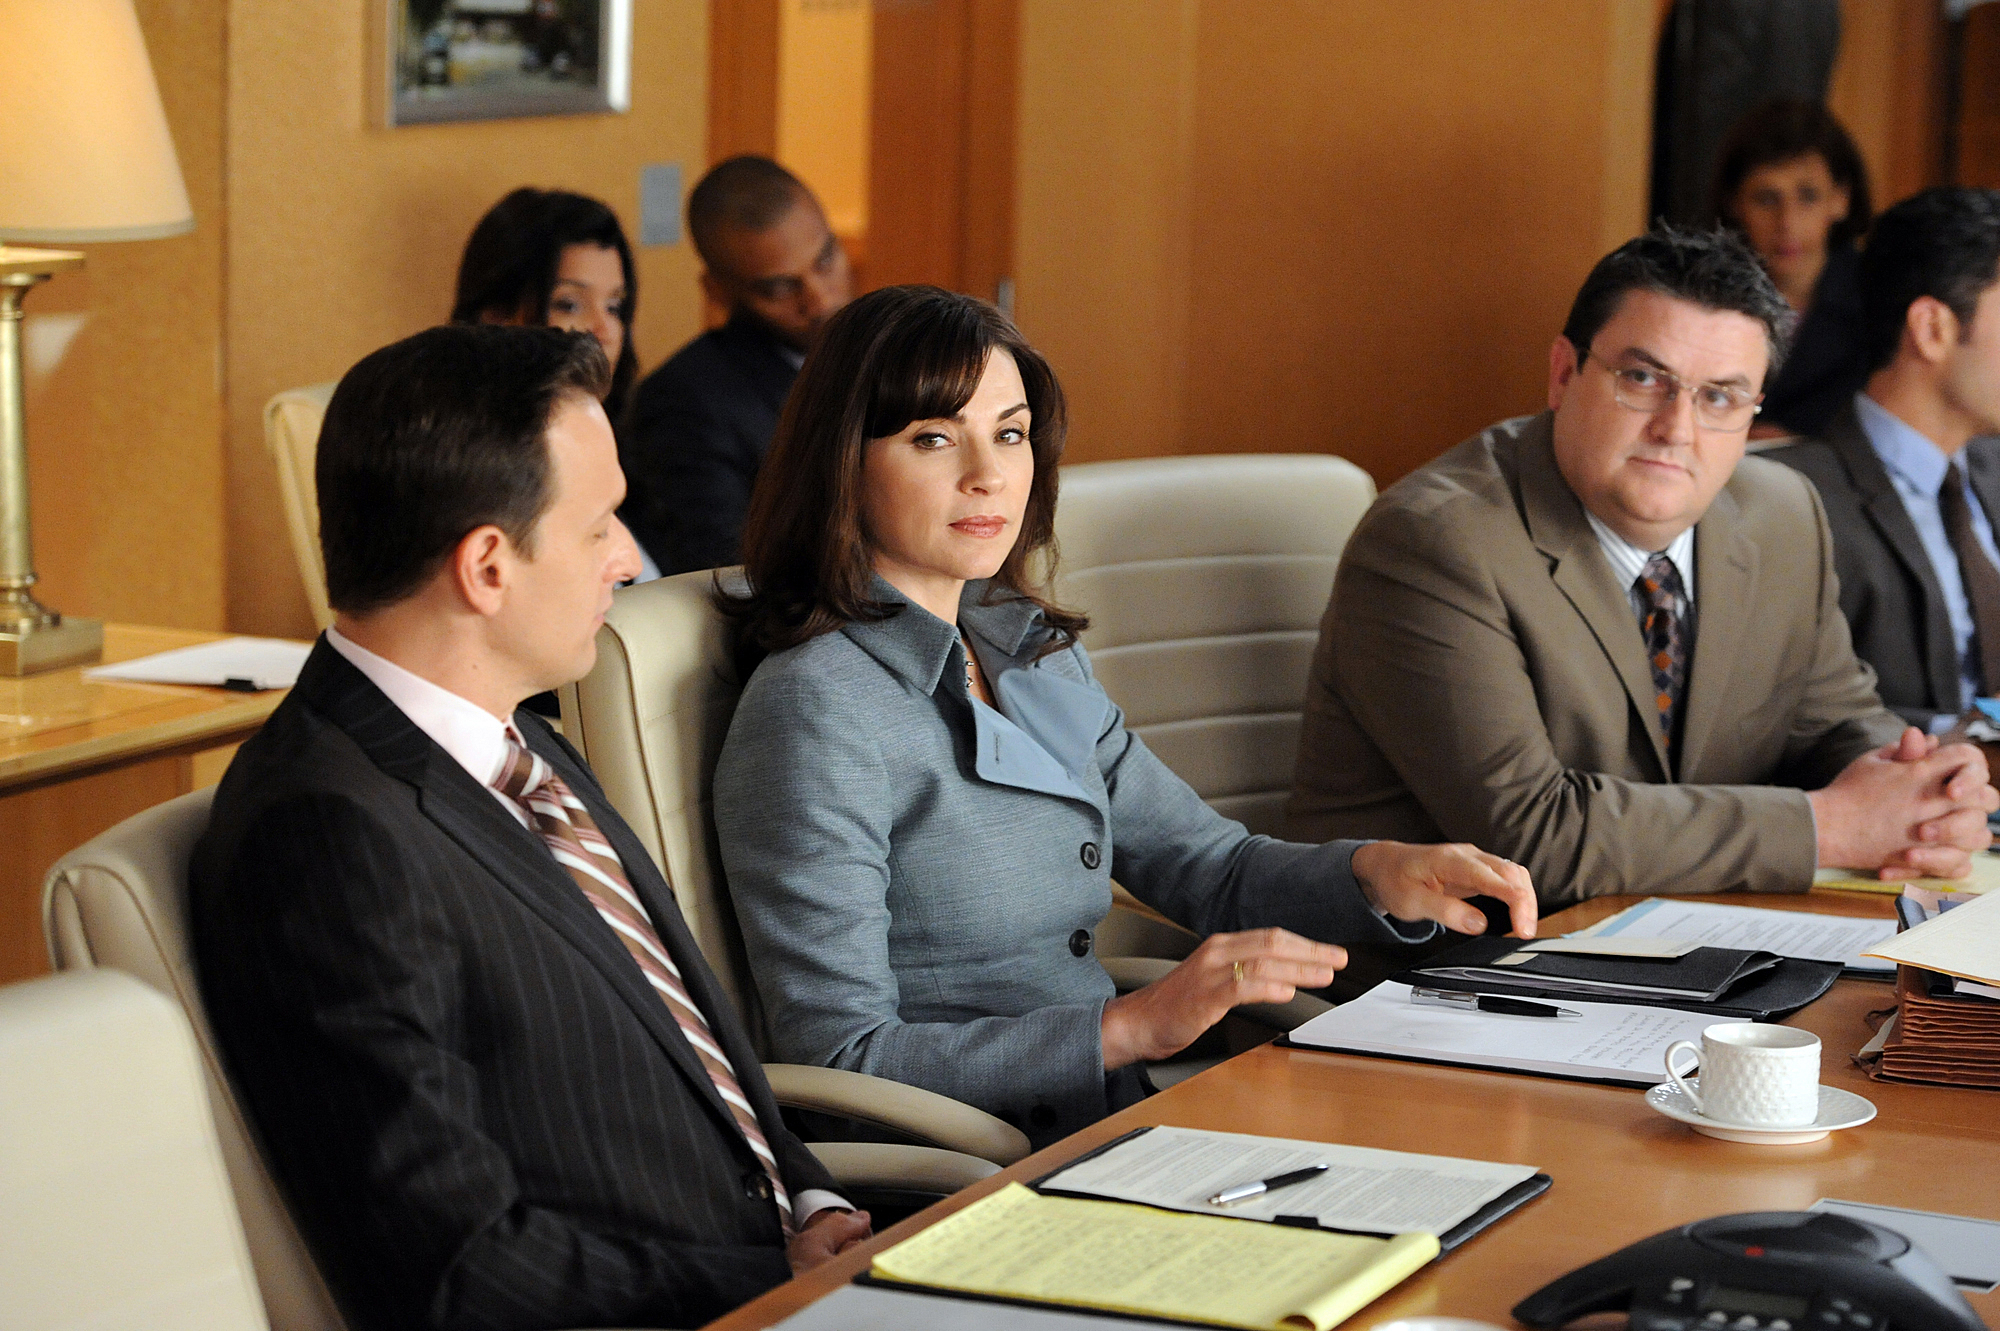 Still of Julianna Margulies, Josh Charles and Ash Brannon in The Good Wife (2009)